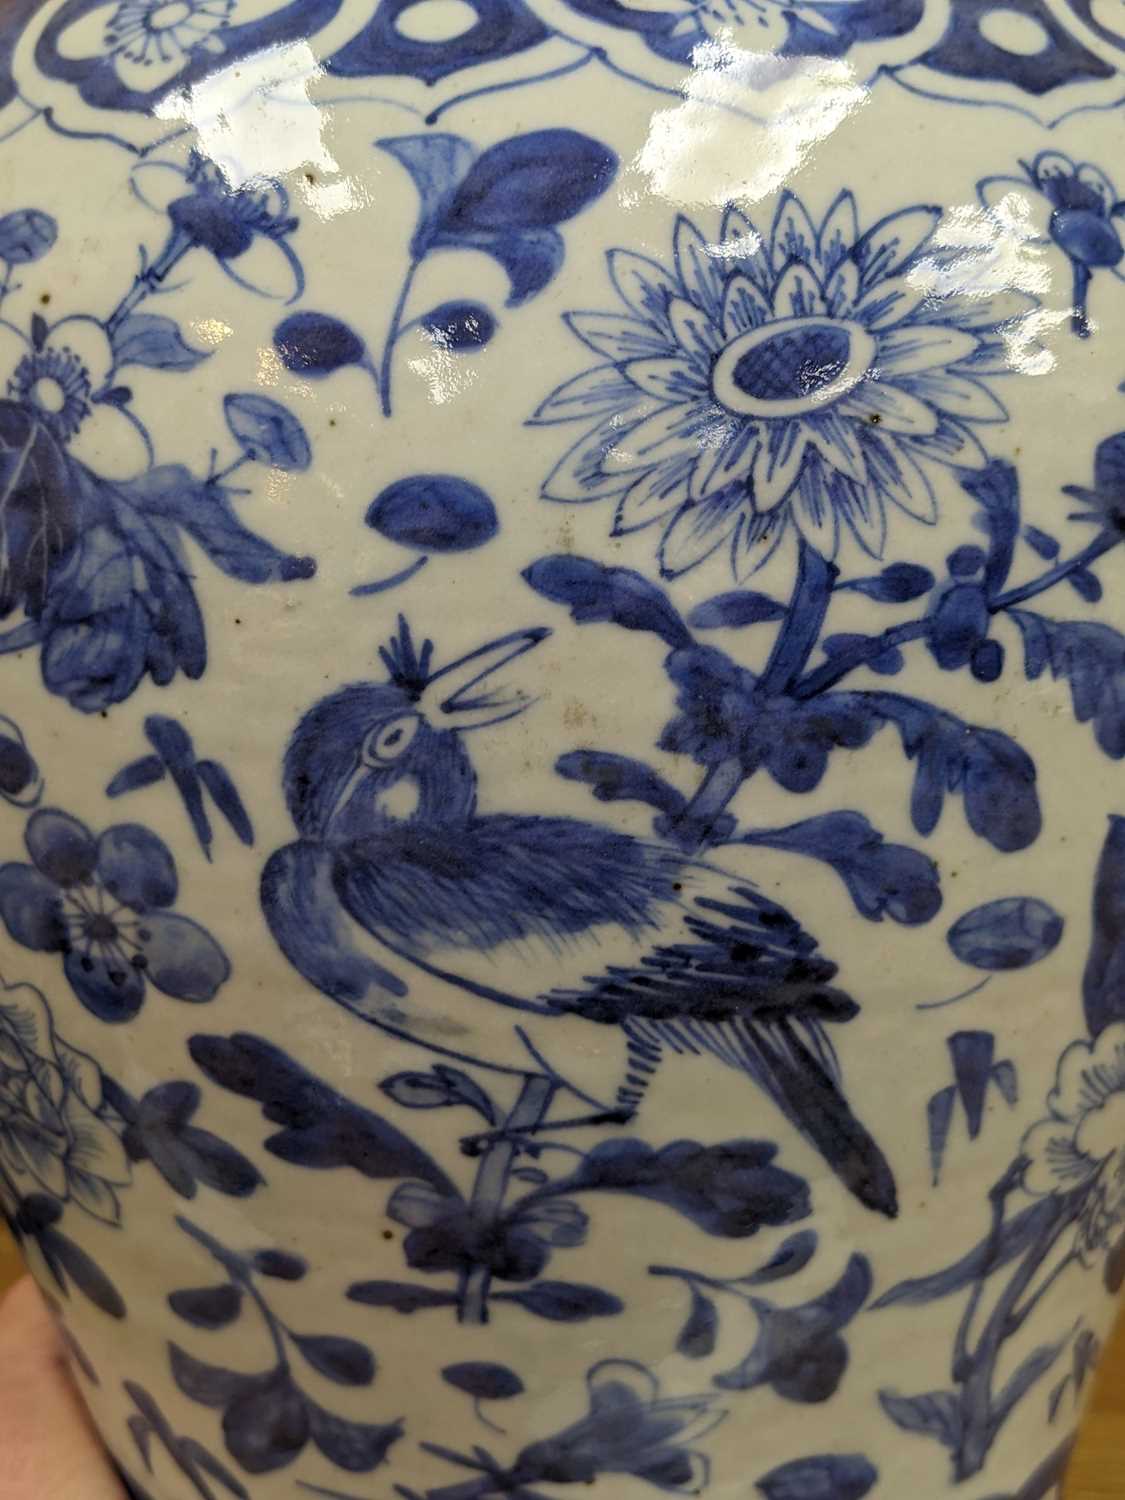 CHINESE BLUE & WHITE BALUSTER VASE, late Qing Dynasty, painted with flowers, insects and birds, - Image 6 of 12